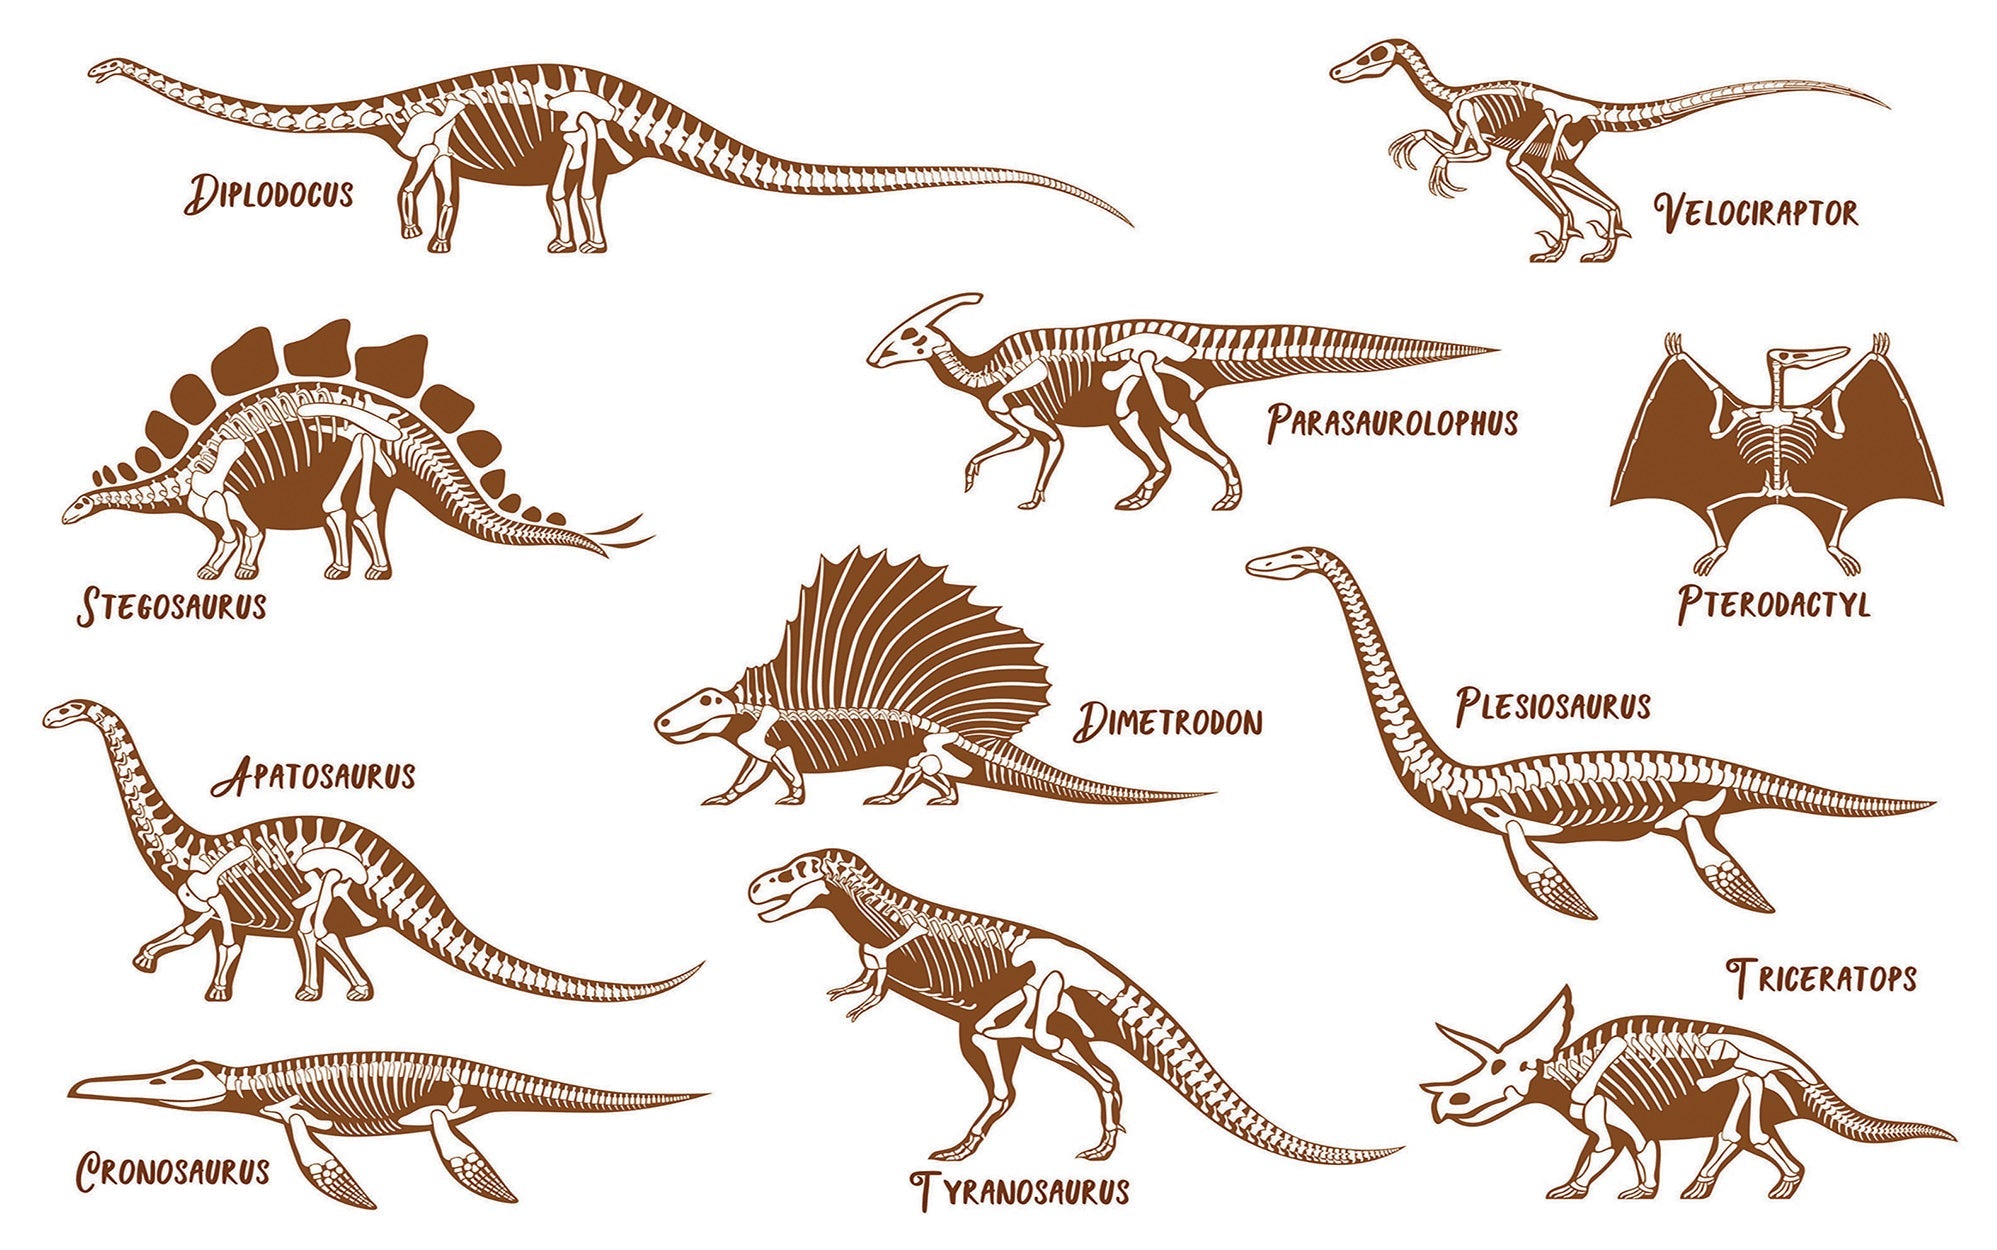 A series of detailed dinosaur illustrations depicted in a brown monochrome style